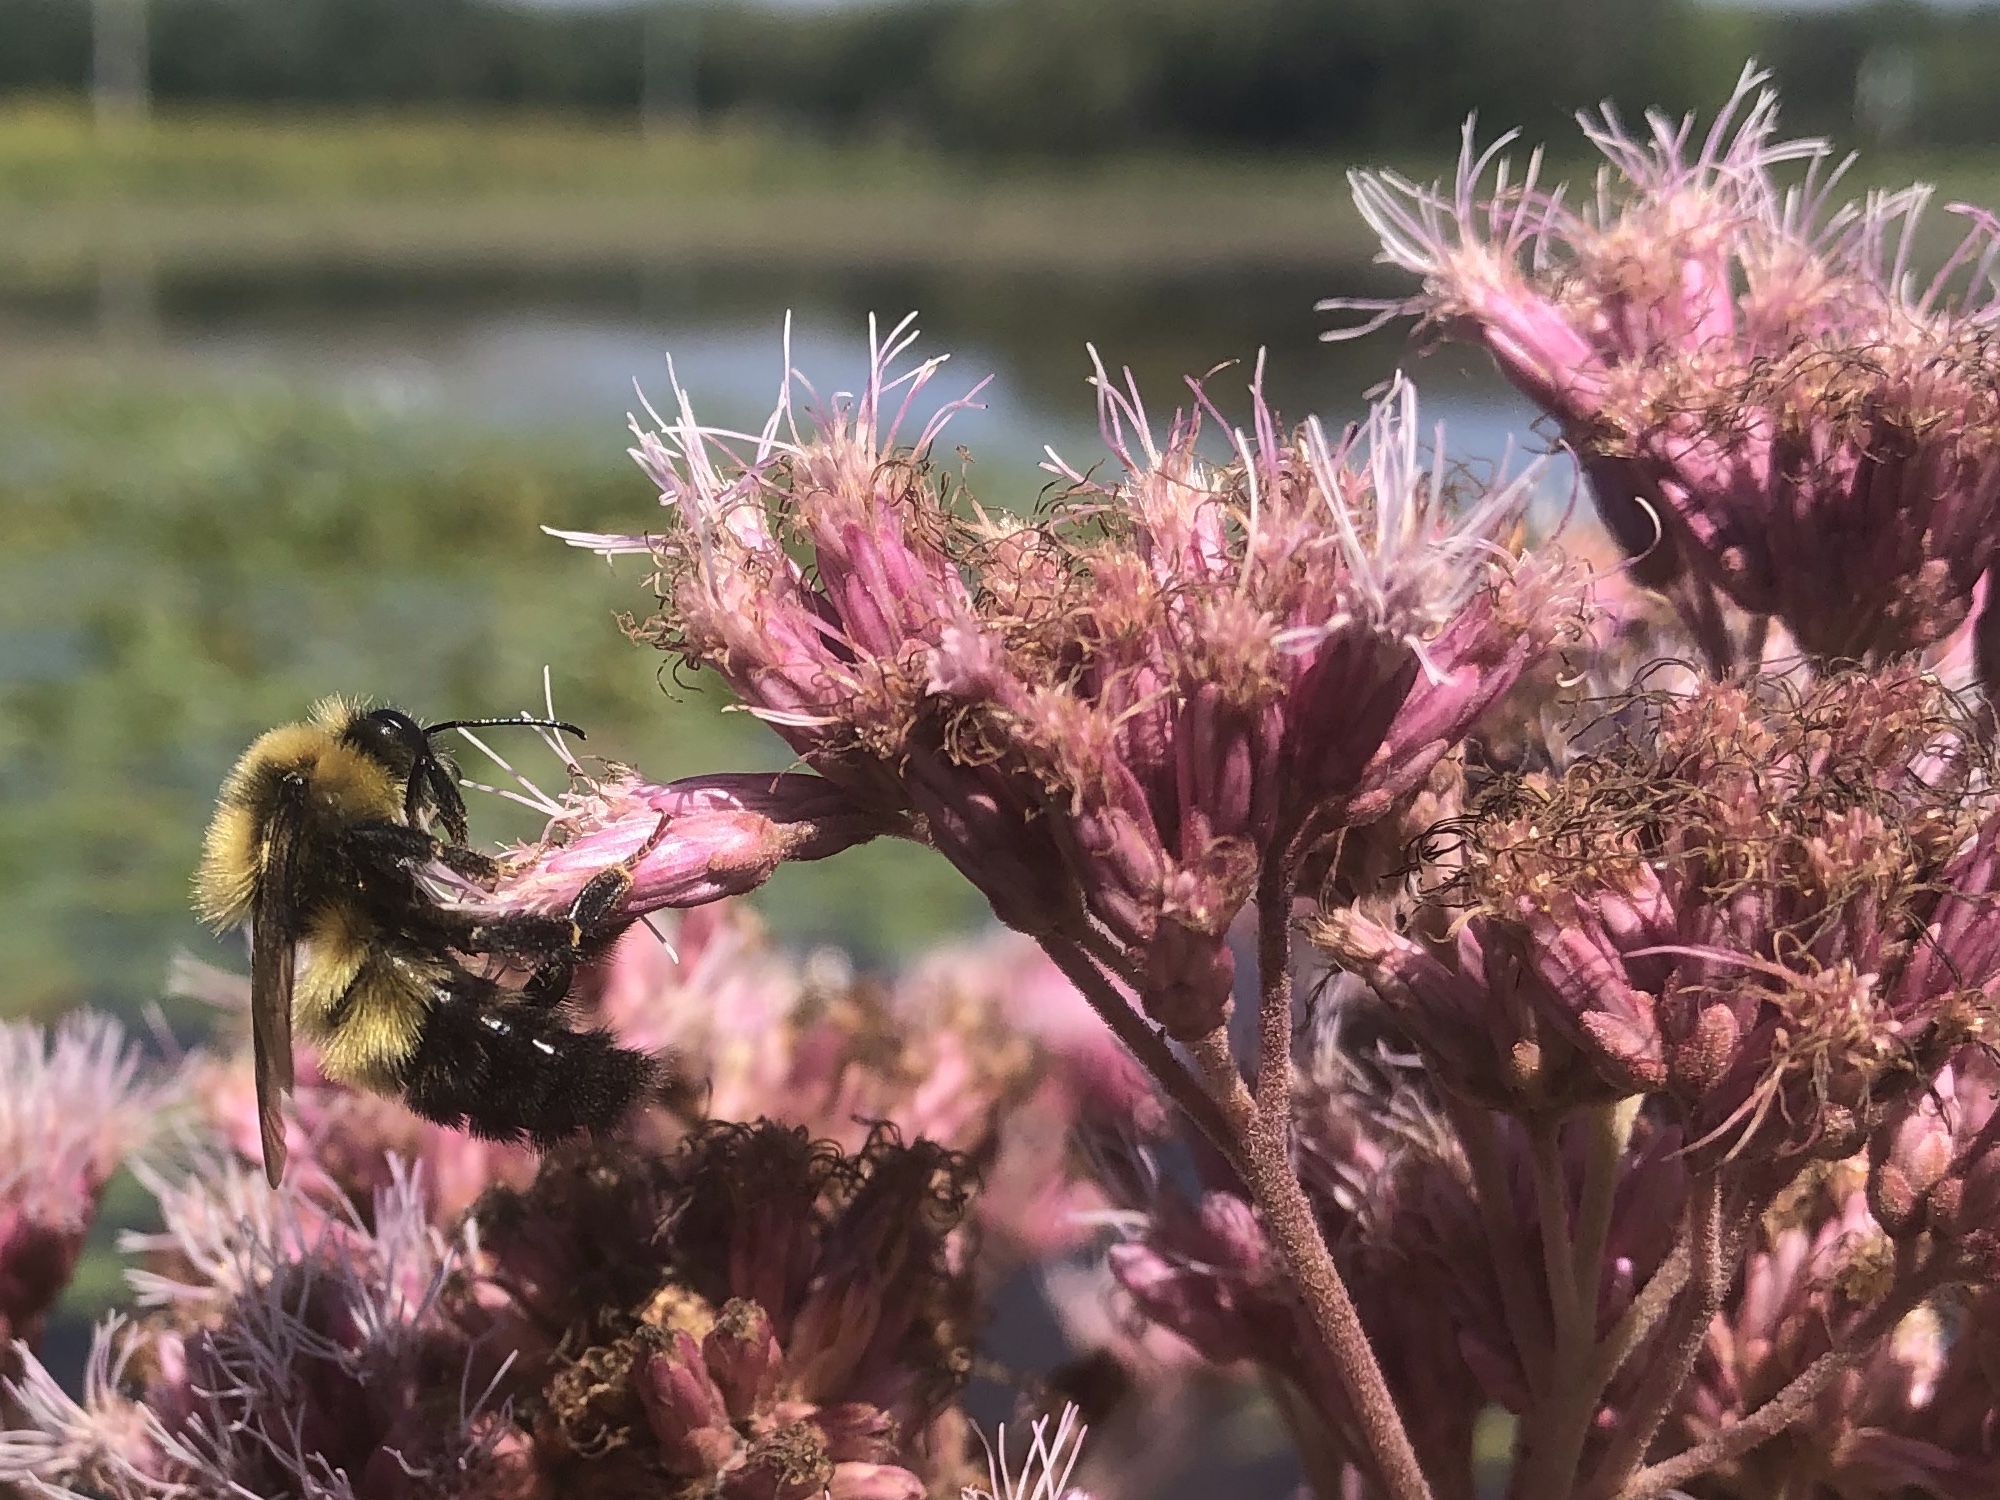 Spotted Joe-Pye Weed on shore of Vilas Park lagoon in Madison, Wisconsin on August 14, 2021.